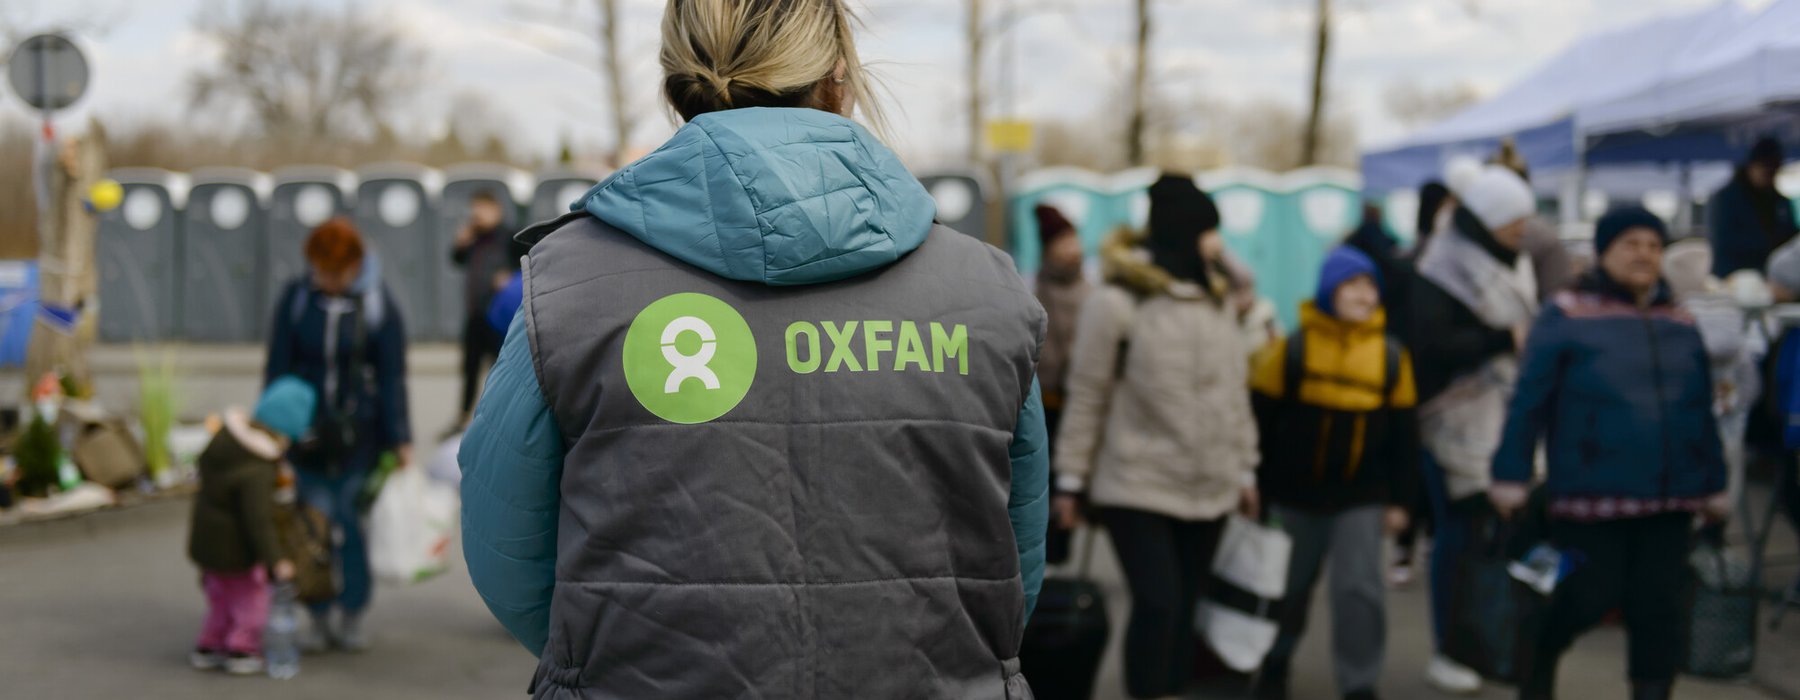 The back of a Oxfam staff member with an Oxfam logo on the gilet and people and portaloos in the background.